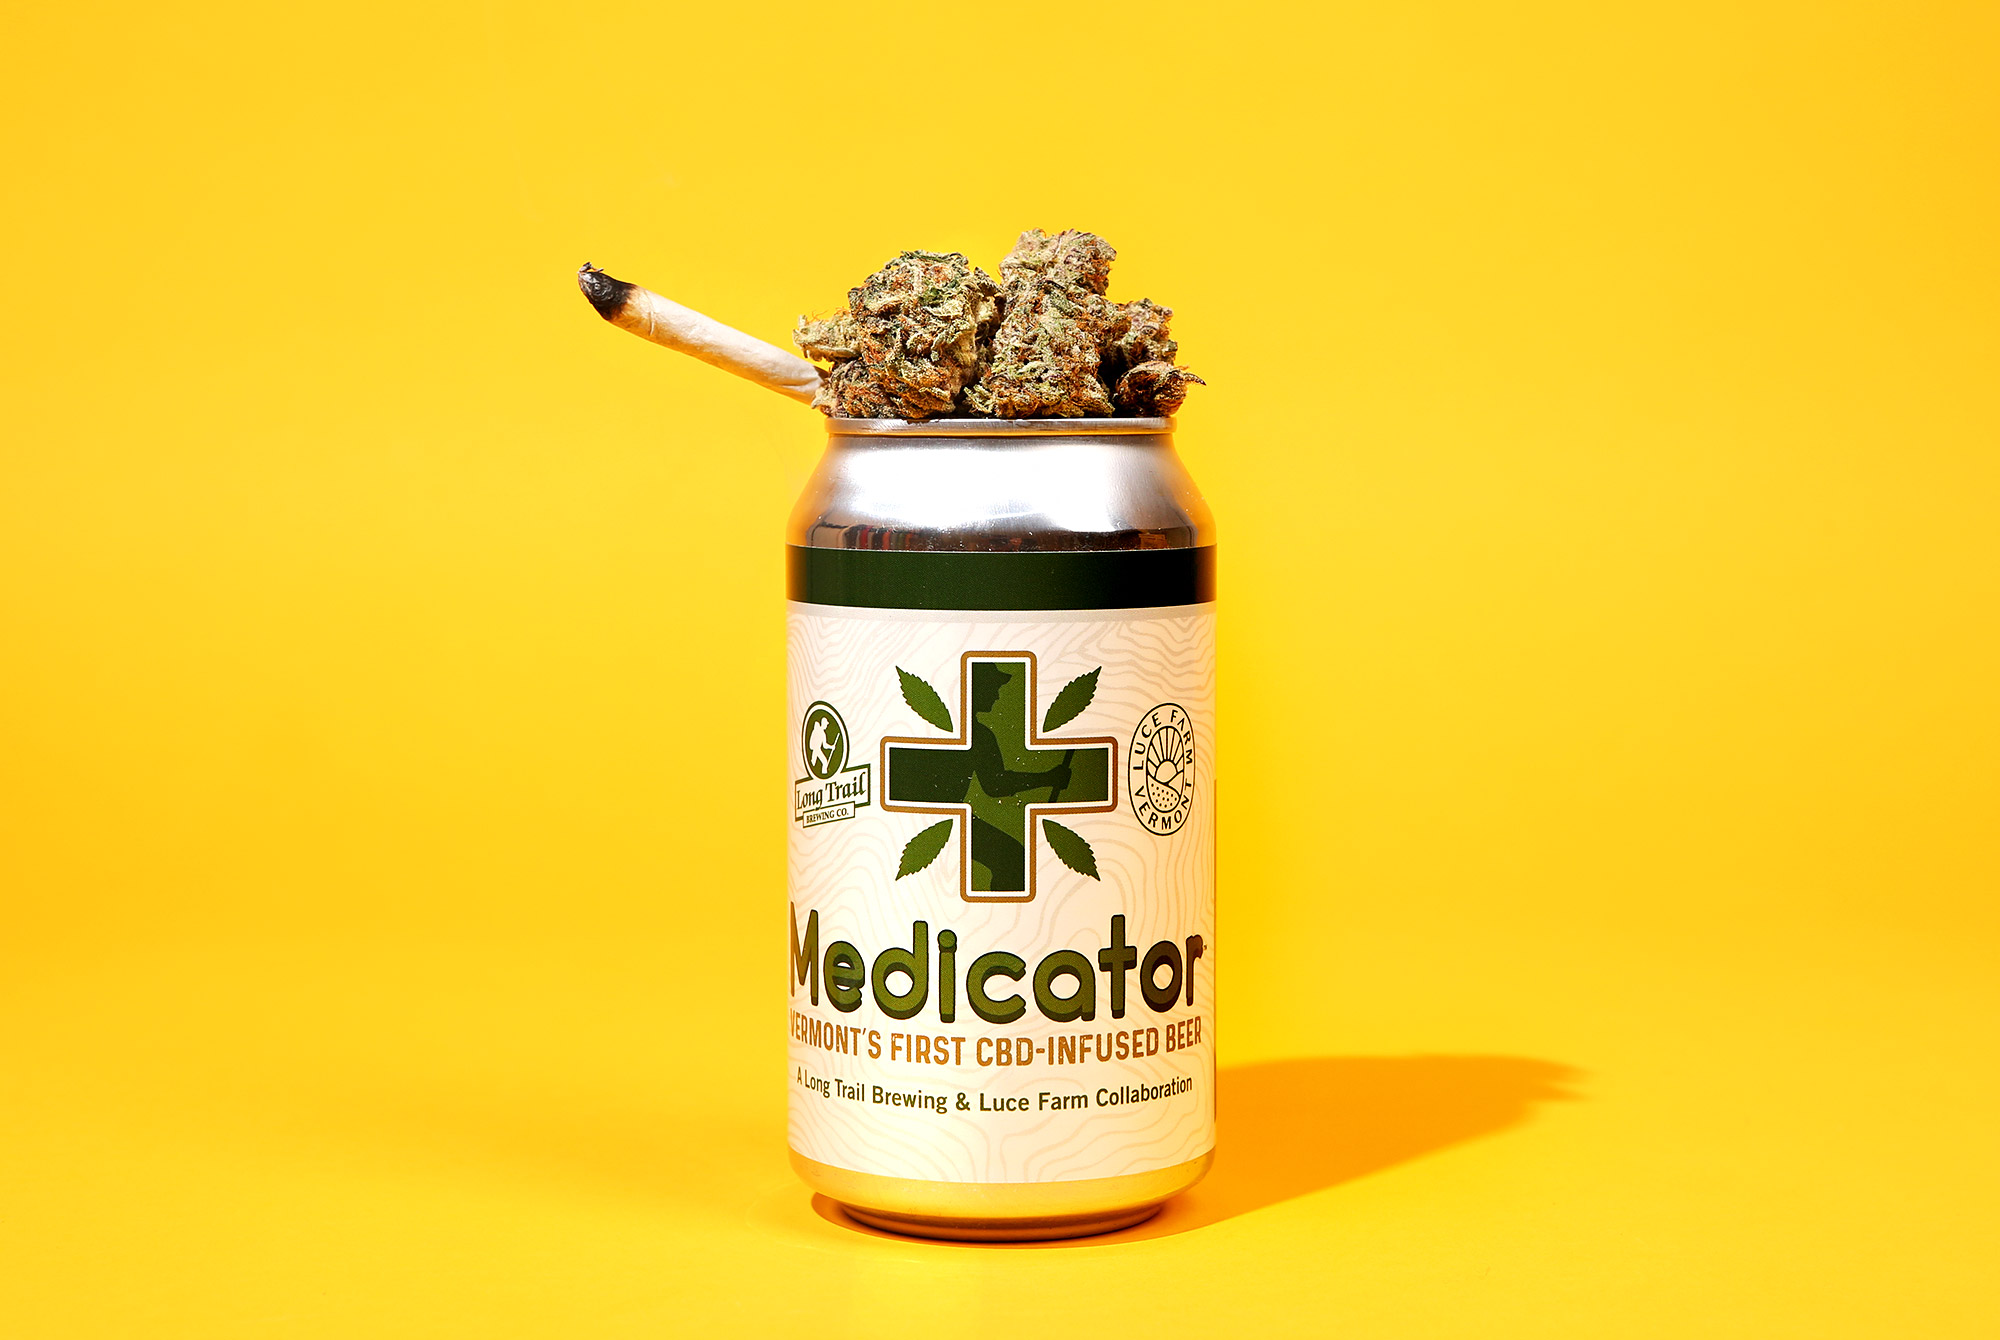 Tasting a Banned CBD-Infused Beer for 4/20